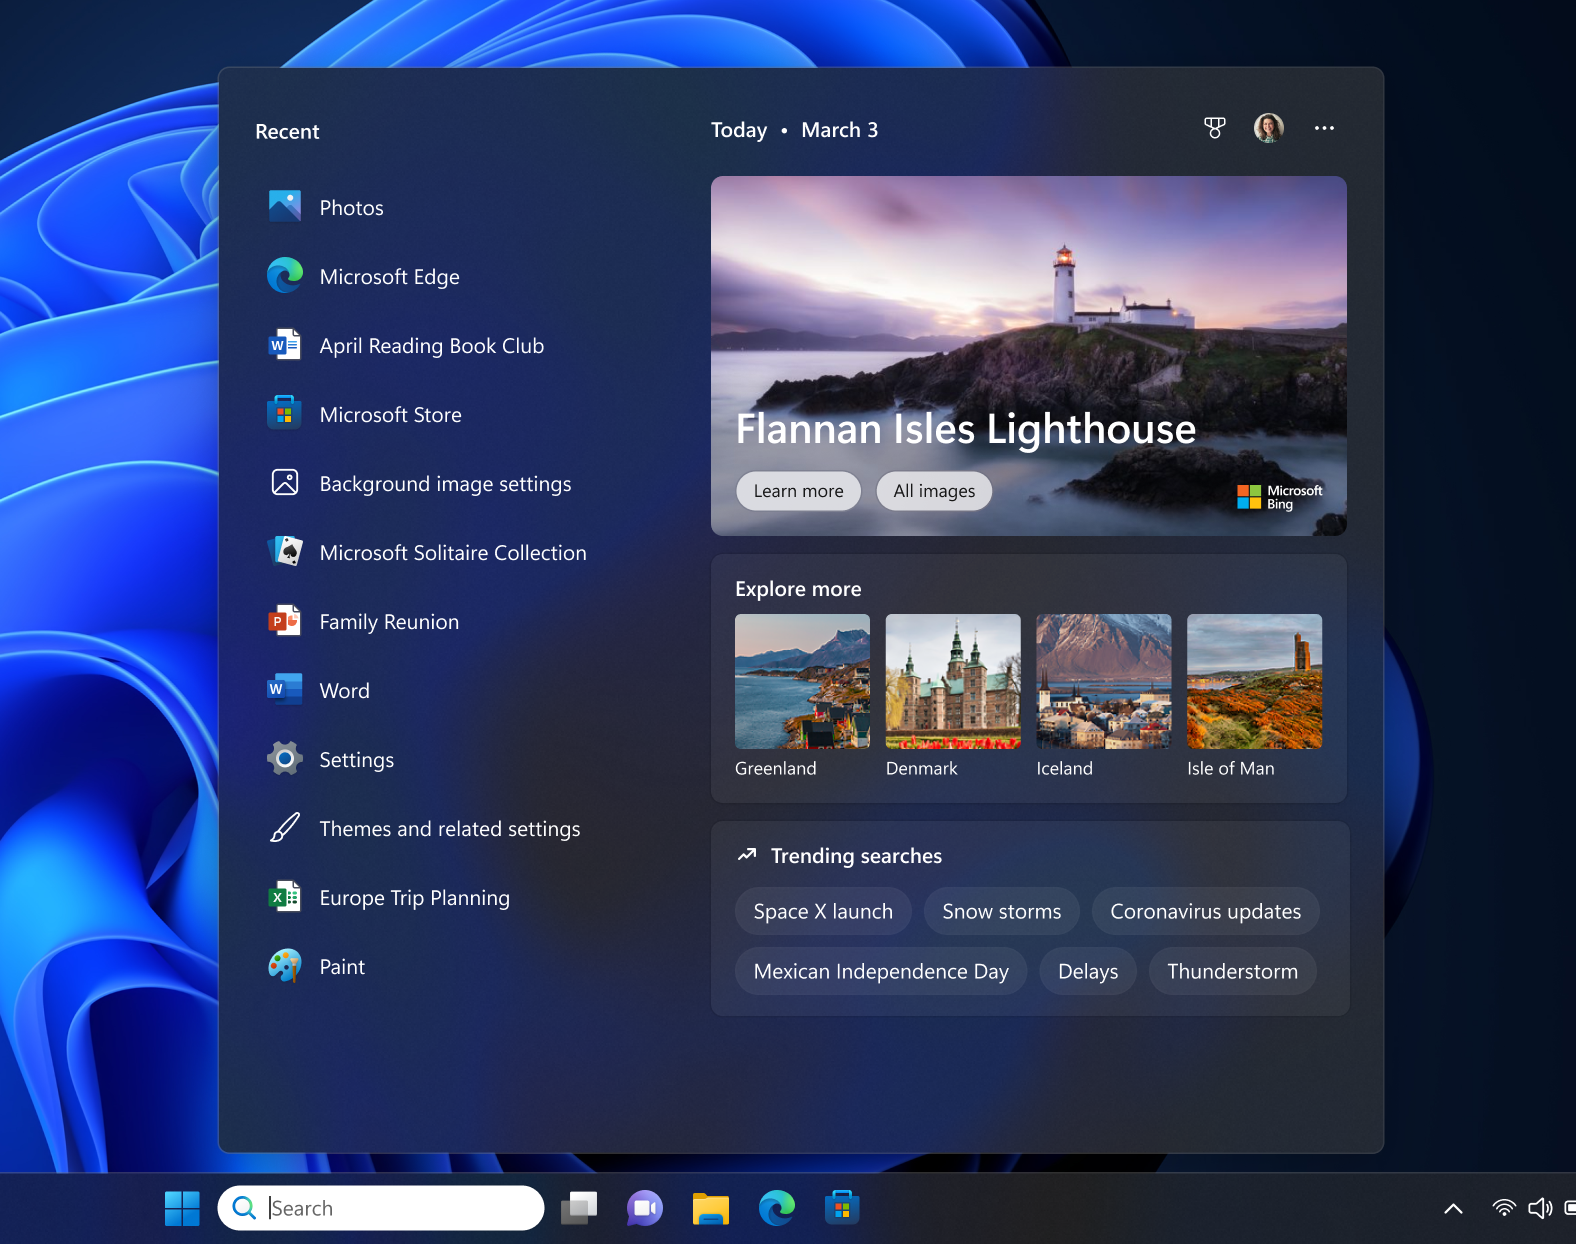 The search box on taskbar will be lighter when Windows is set to a custom color mode